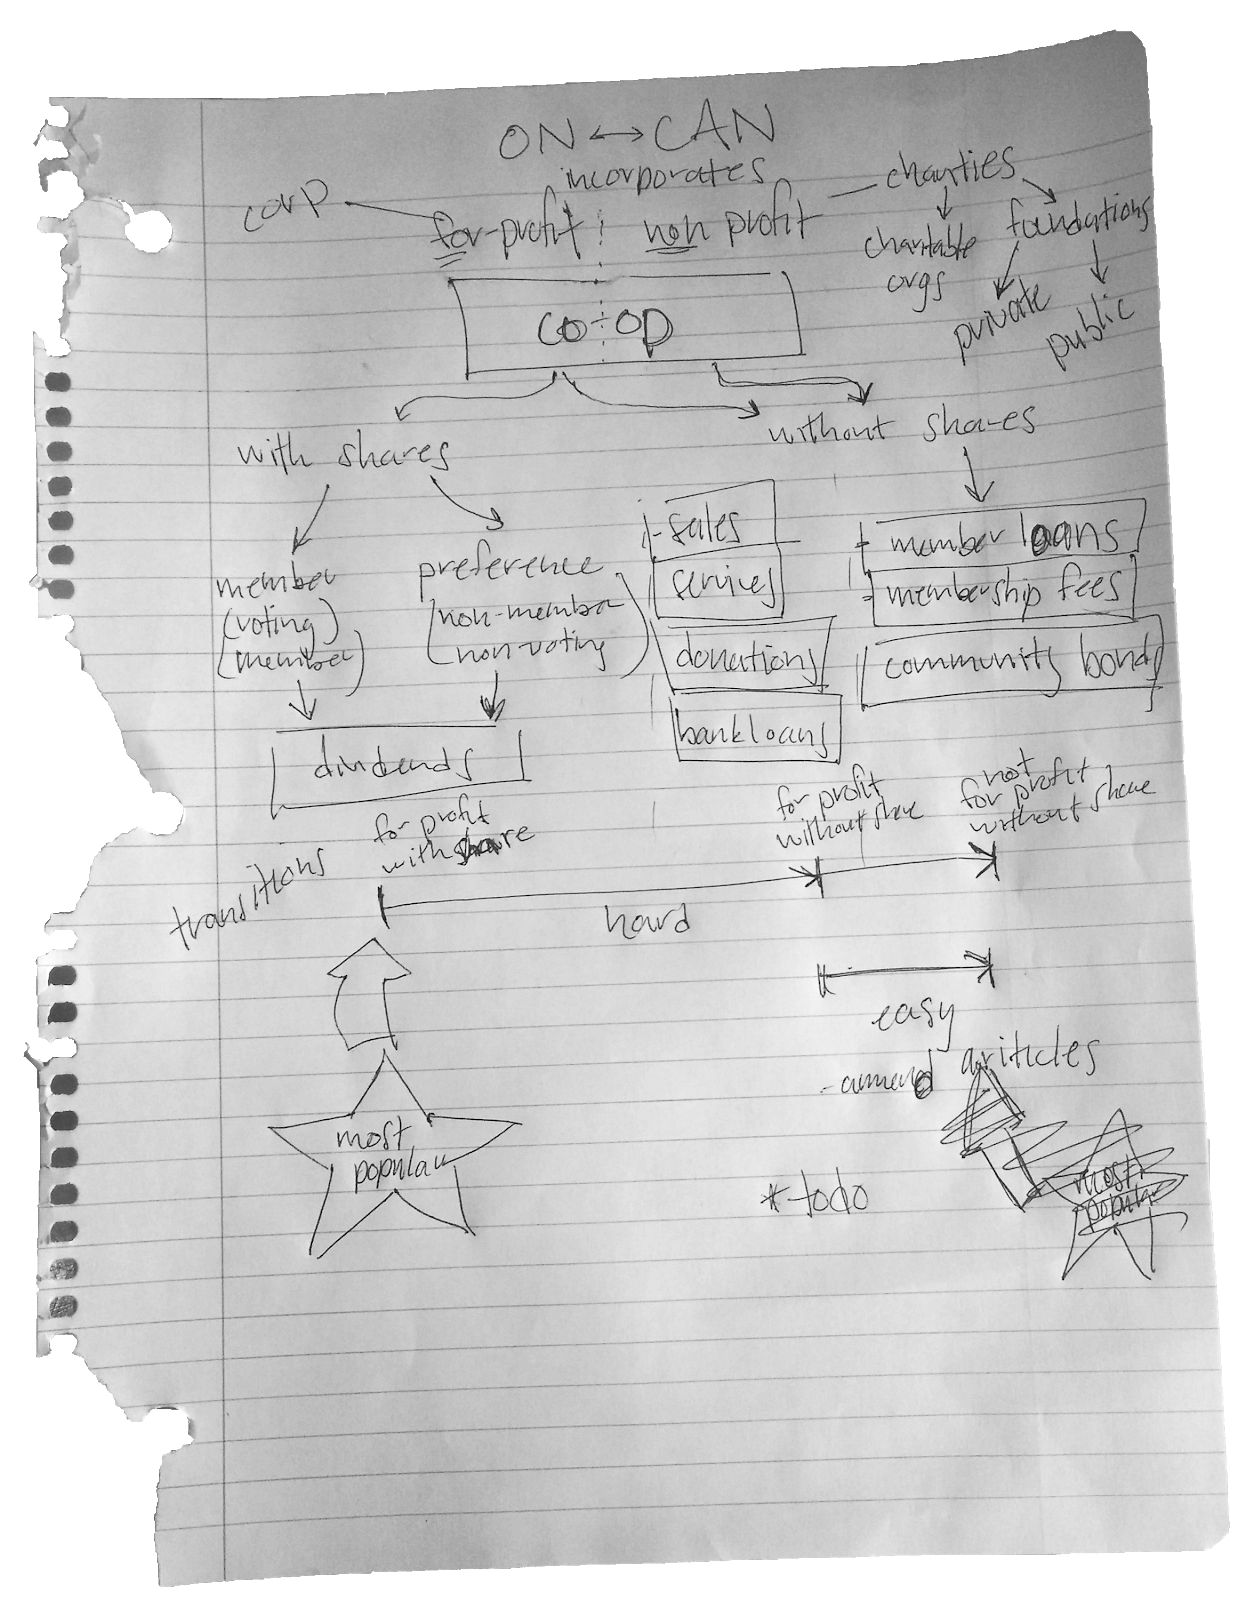 An elaborate flowchart showing the repercushions of choosing Ontario vs Canada, for-profit vs non-profit, and all the fundraising tools available to each.